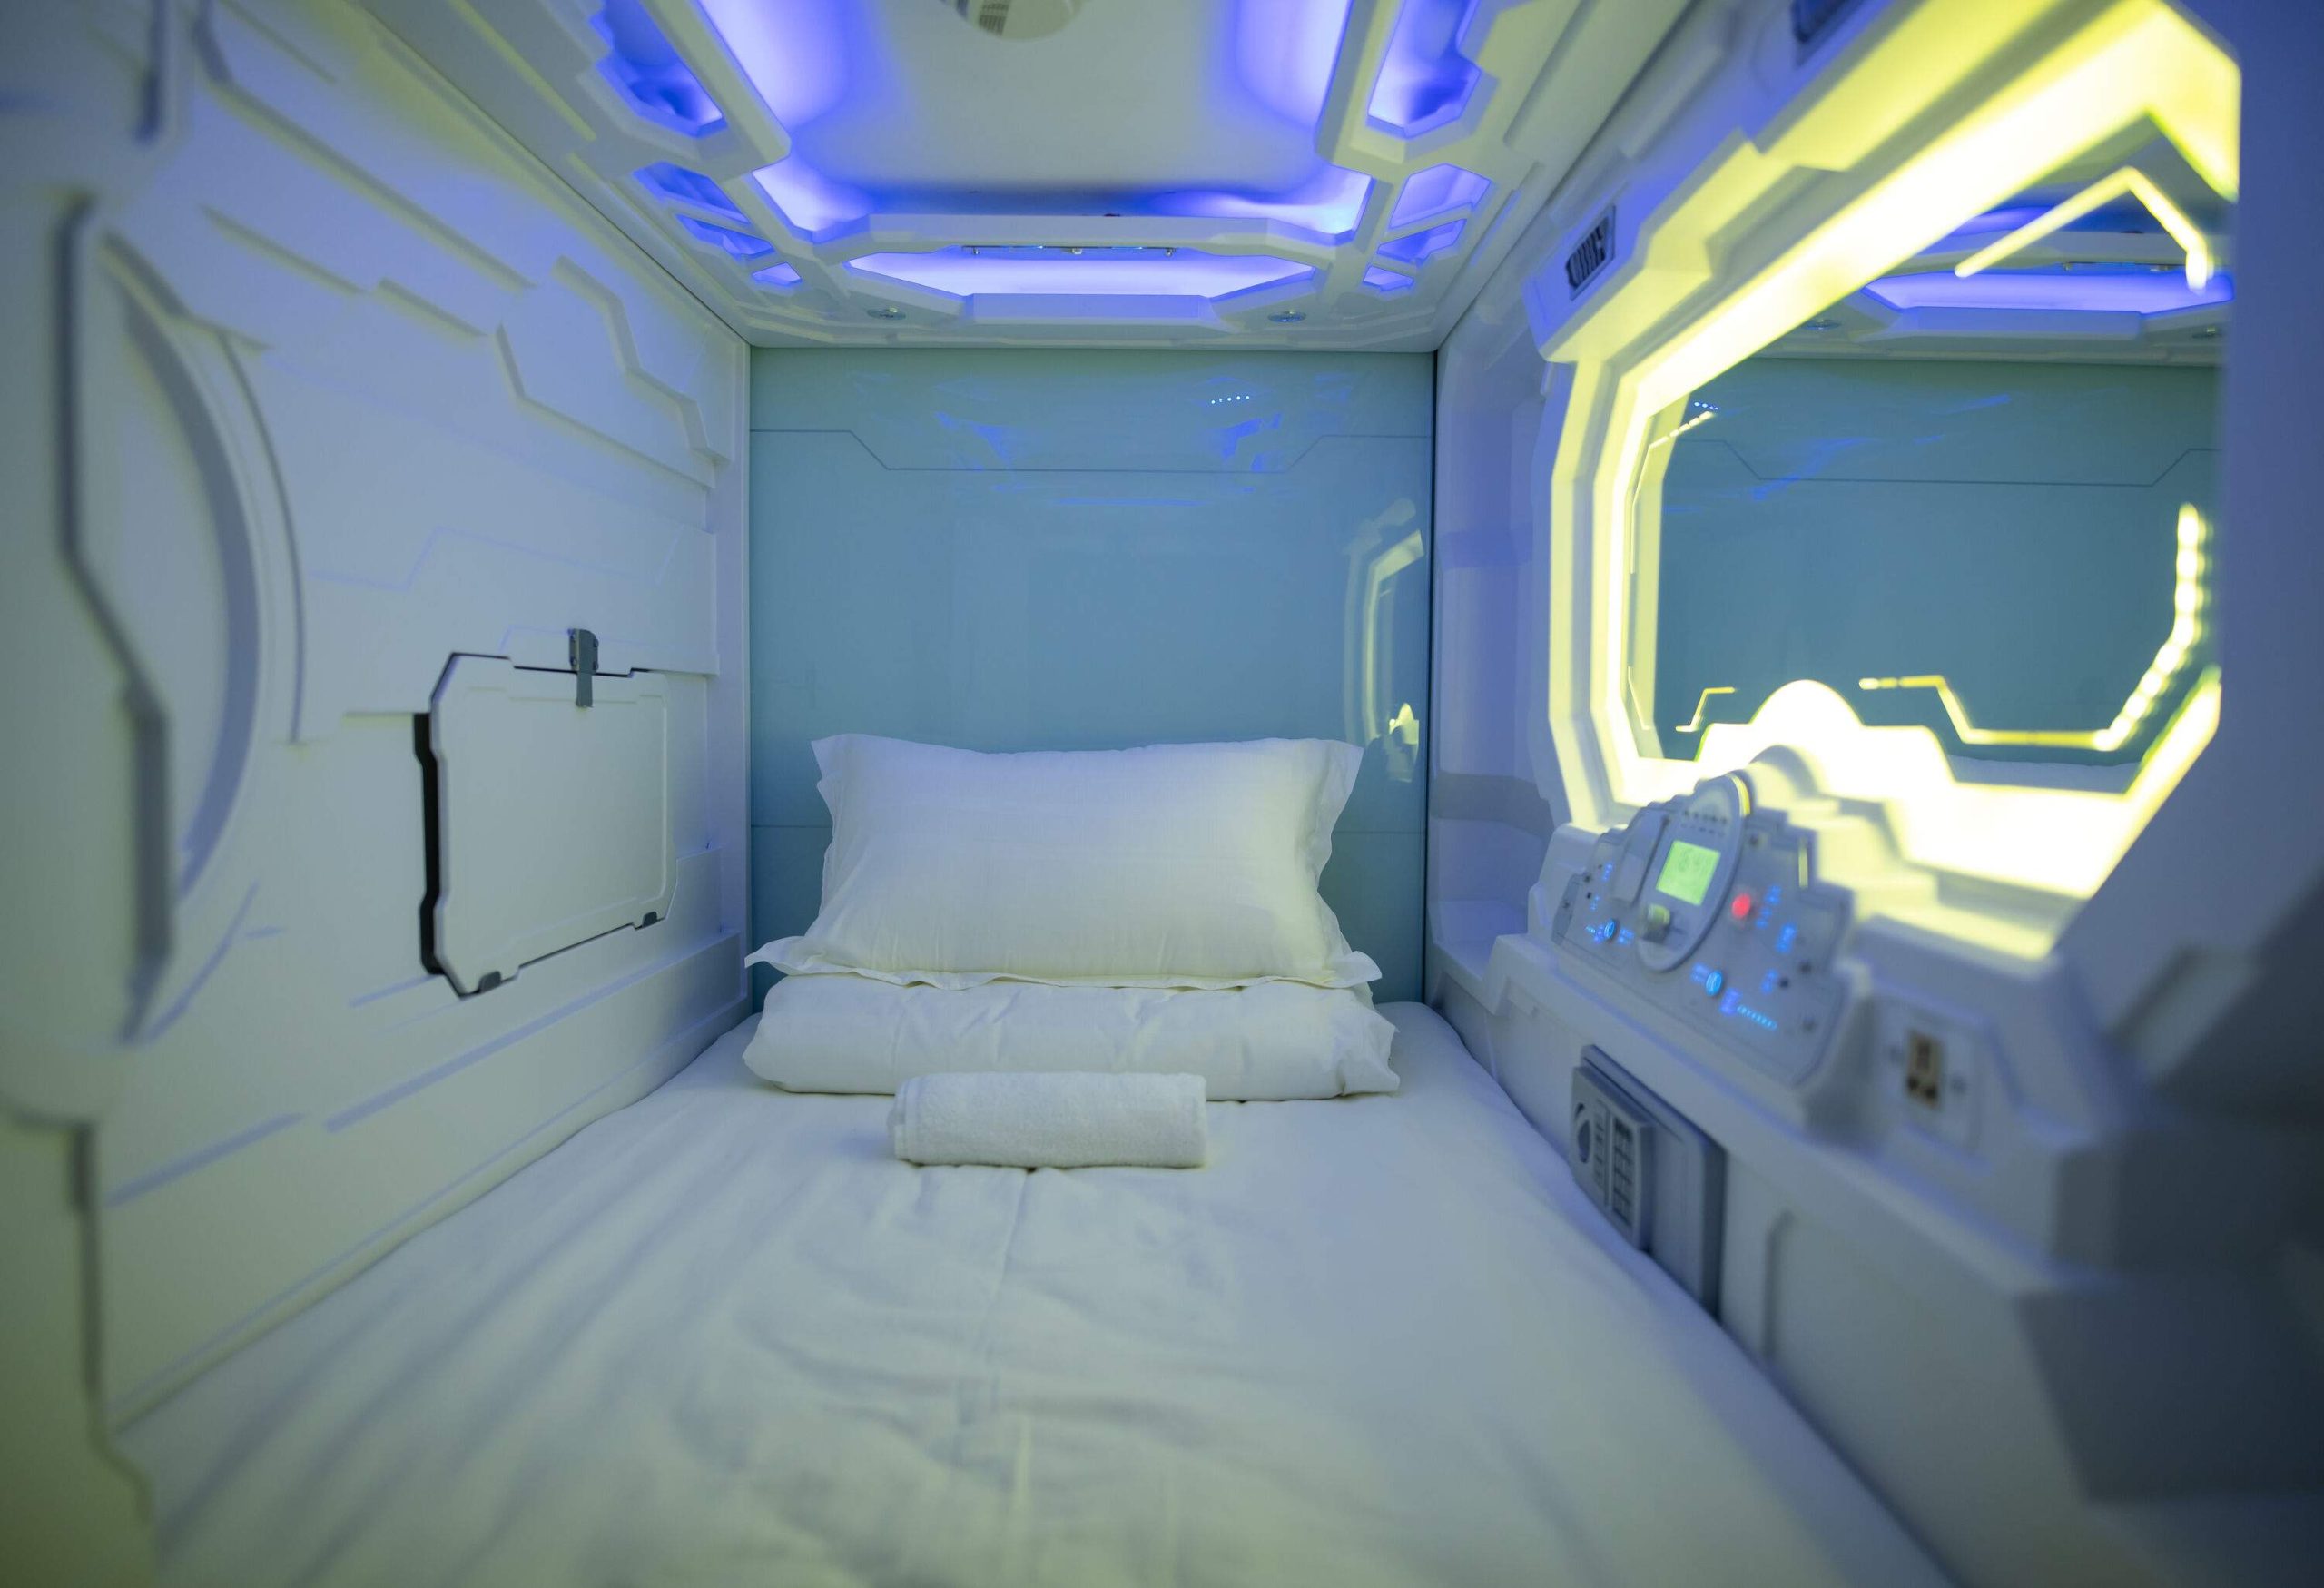 A modern and cosy capsule hotel room with white walls, equipped with an illuminated mirror and a small safe box.